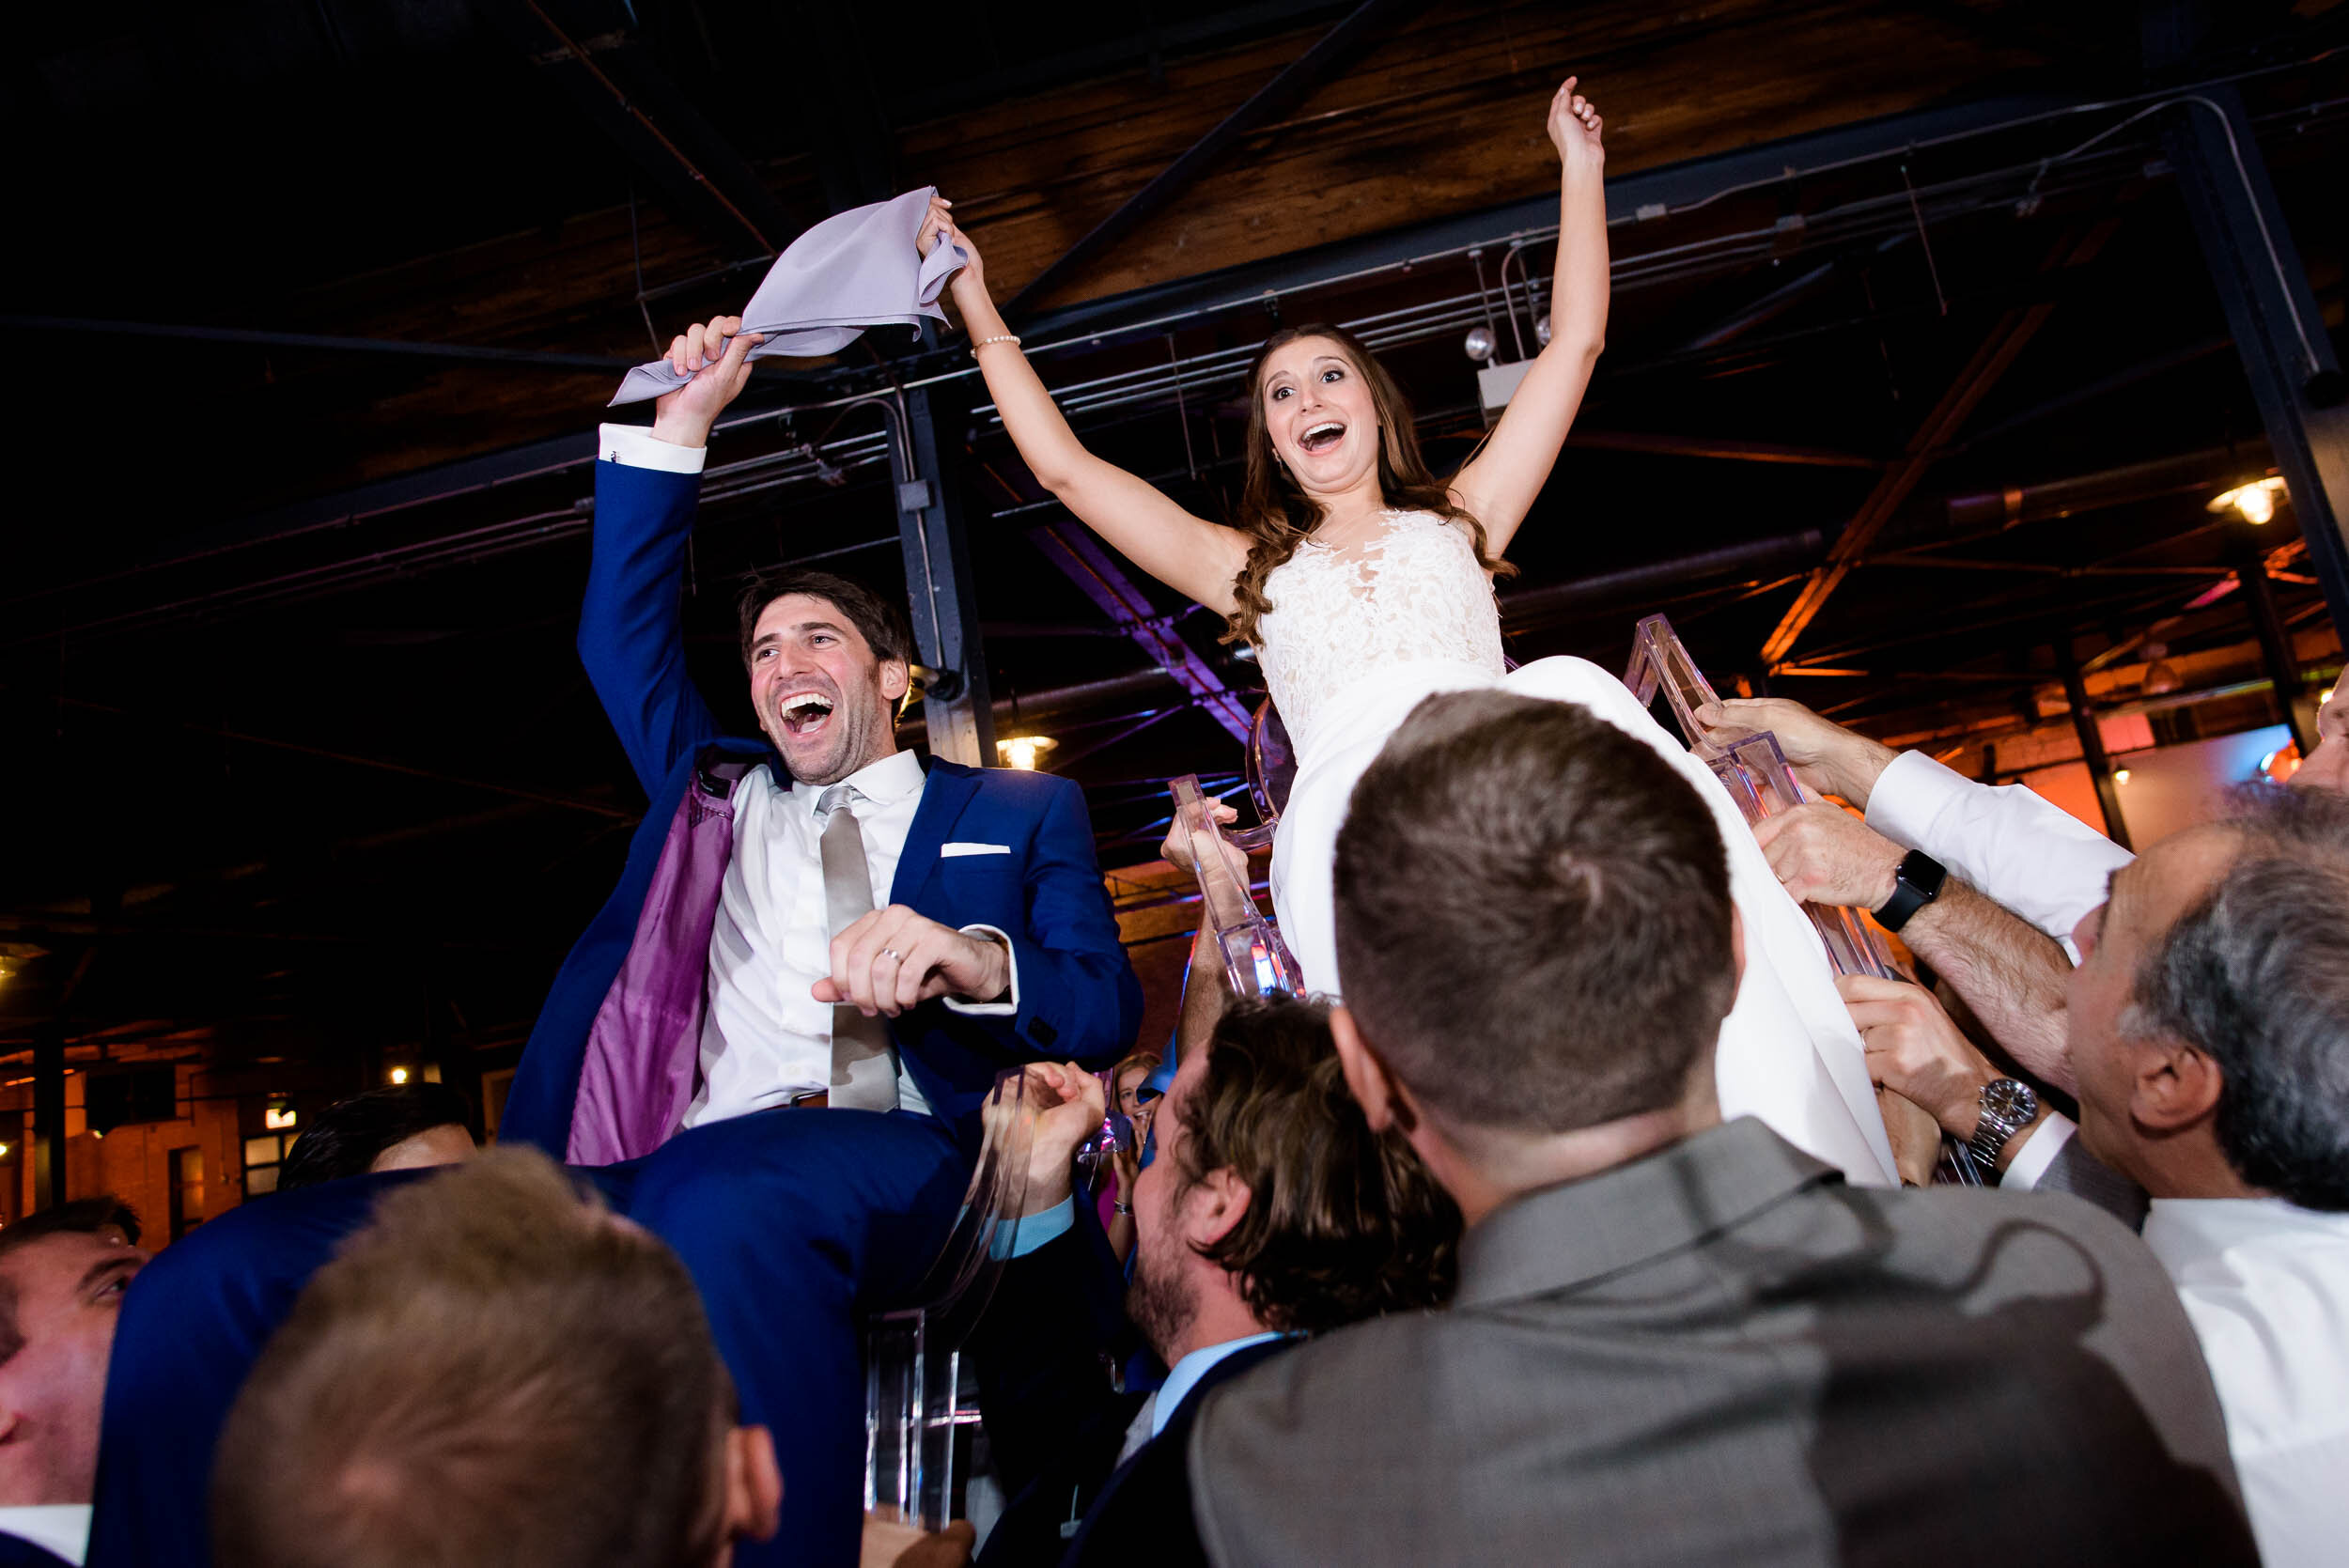 Bride and groom get lifted on chairs during the horah: Ravenswood Event Center Chicago wedding captured by J. Brown Photography.  